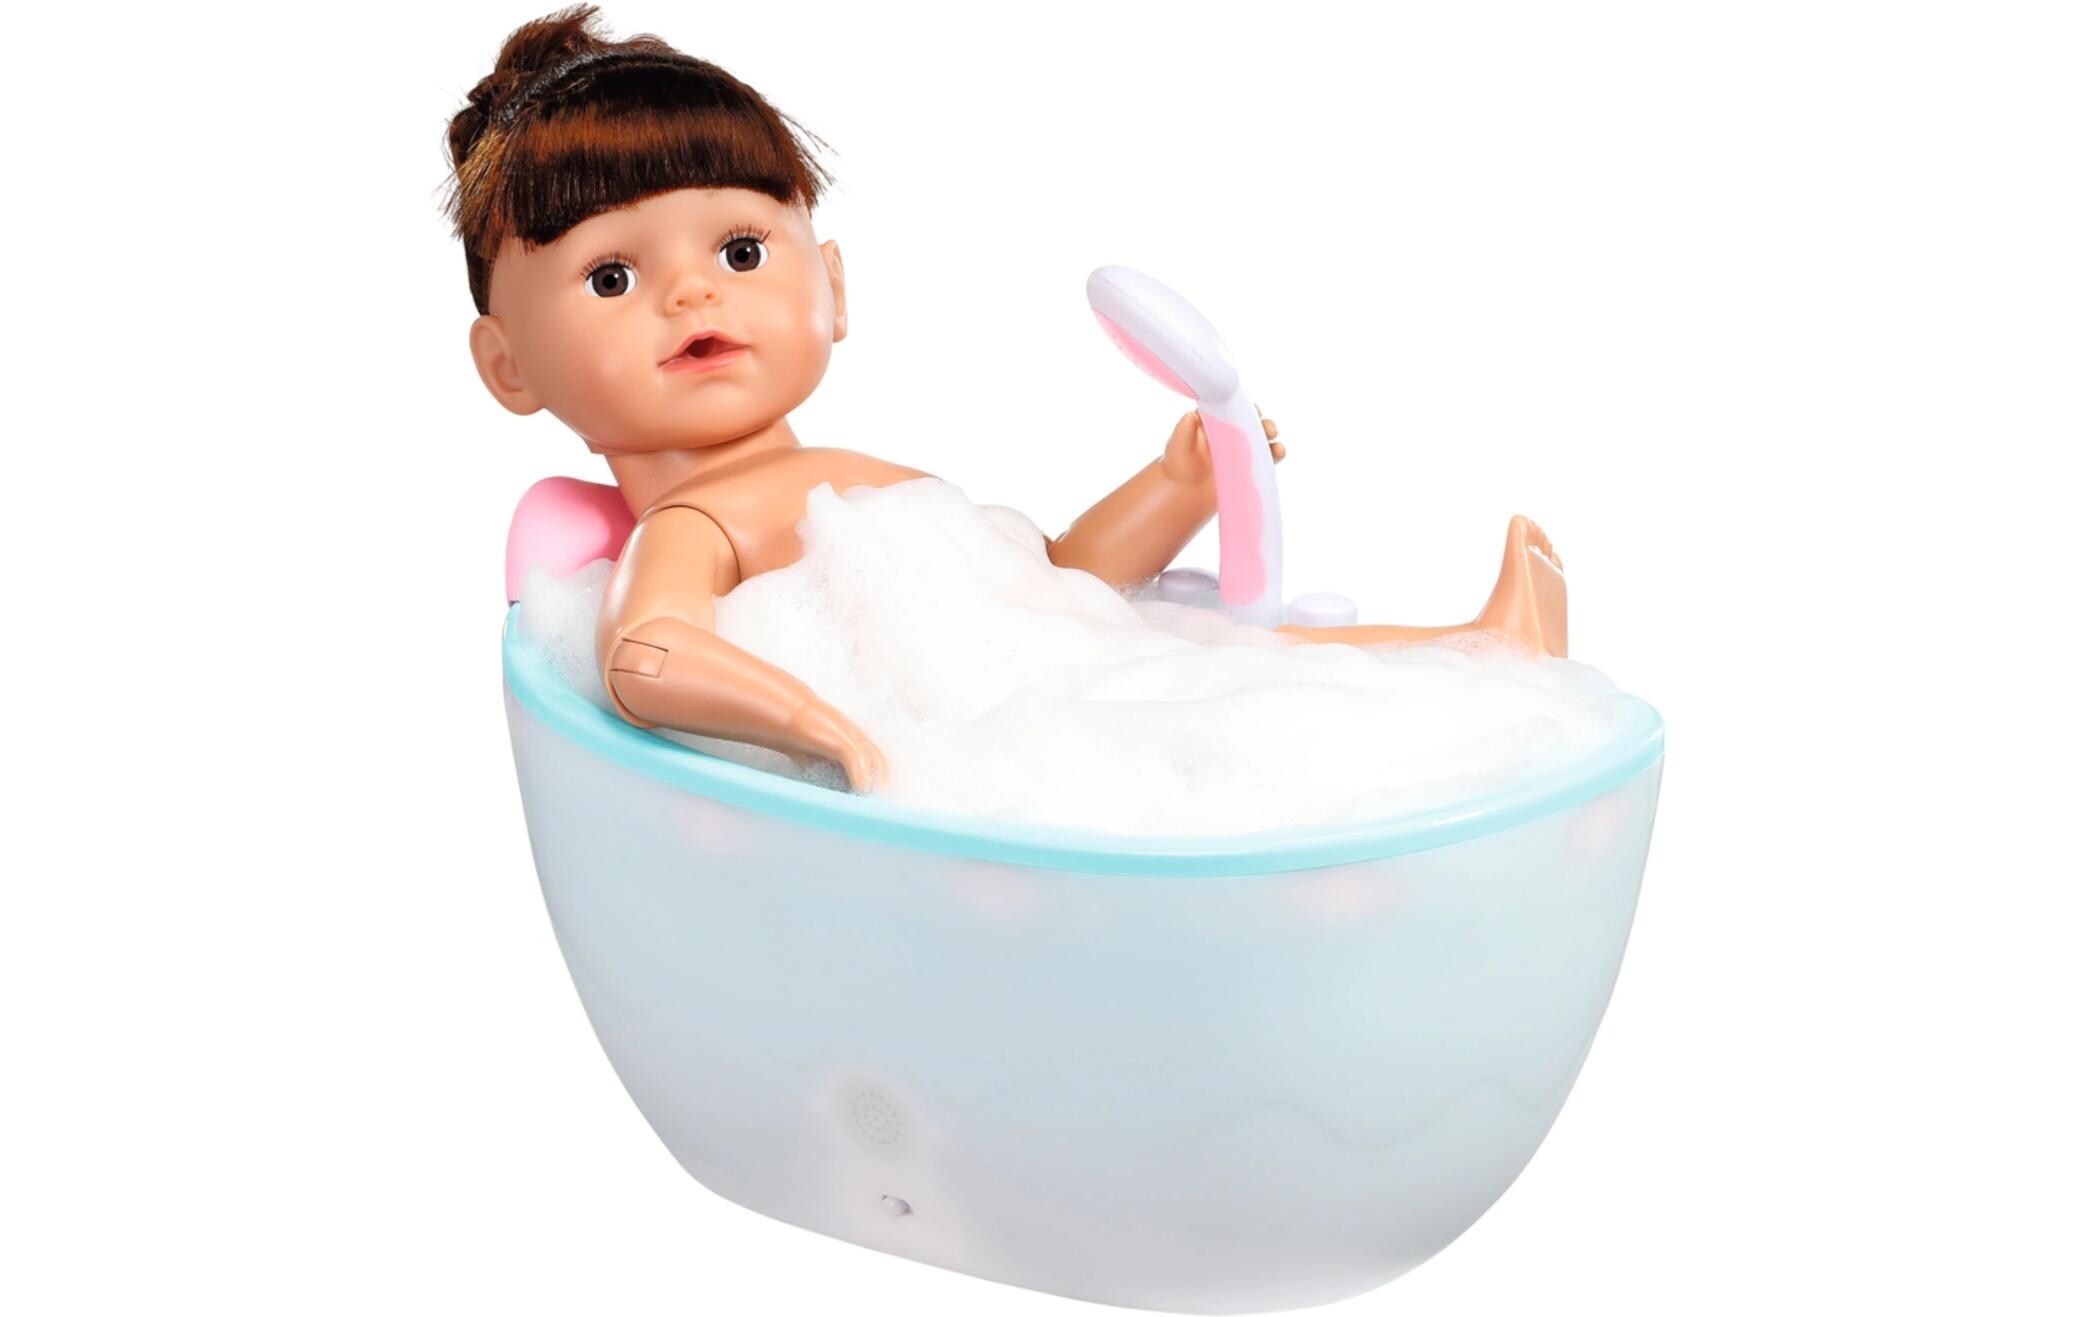 Baby Born Anziehpuppe »Sister Play & Style 43 cm brunette«